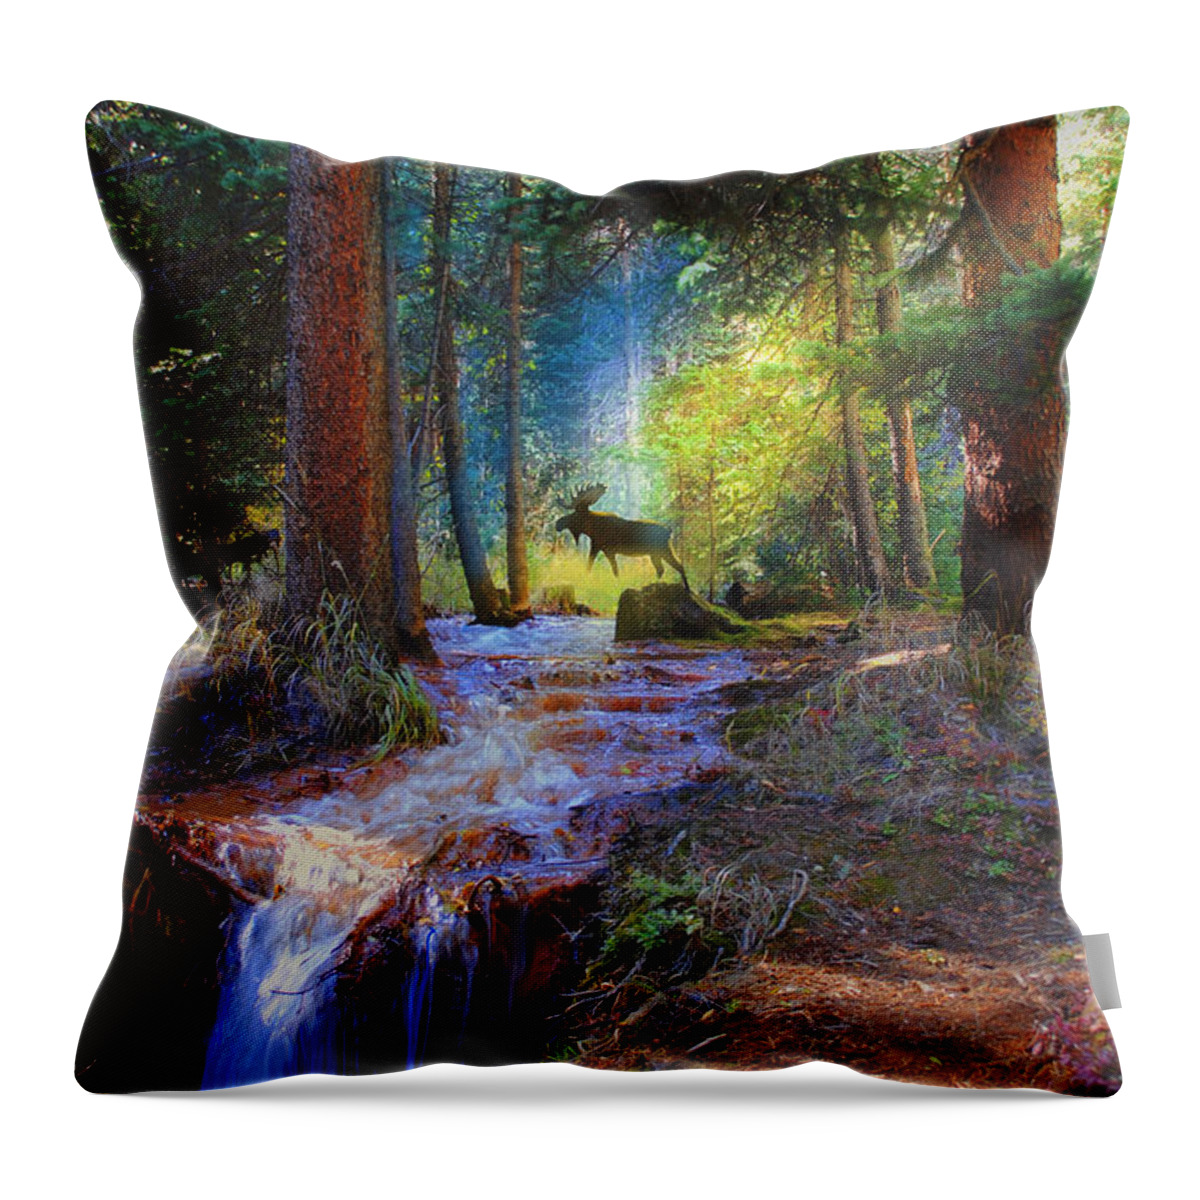 Wildlife Throw Pillow featuring the digital art Hall Valley Moose by J Griff Griffin